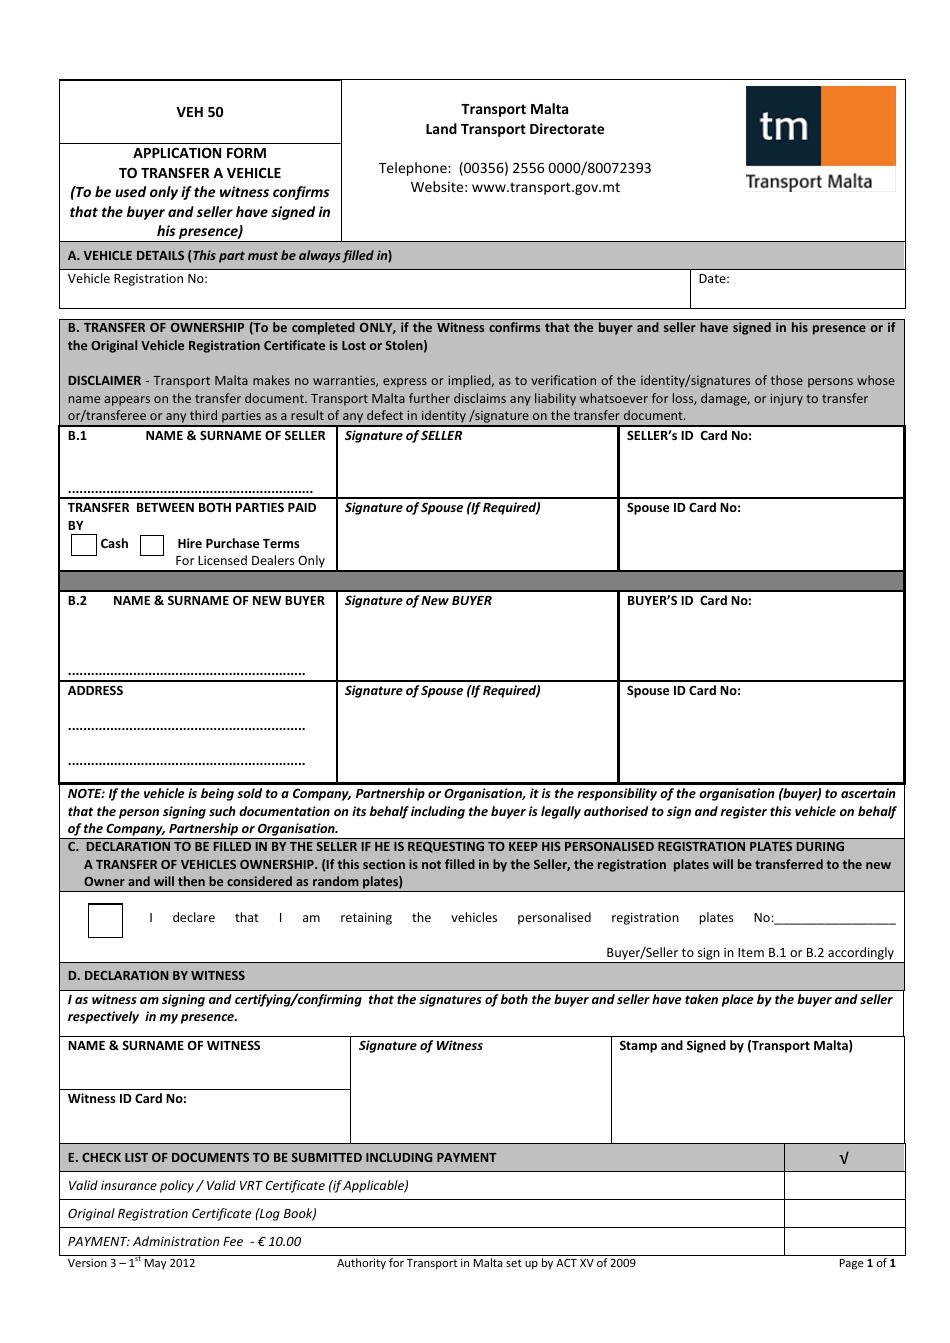 Form VEH50 Application Form to Transfer a Vehicle - Malta, Page 1